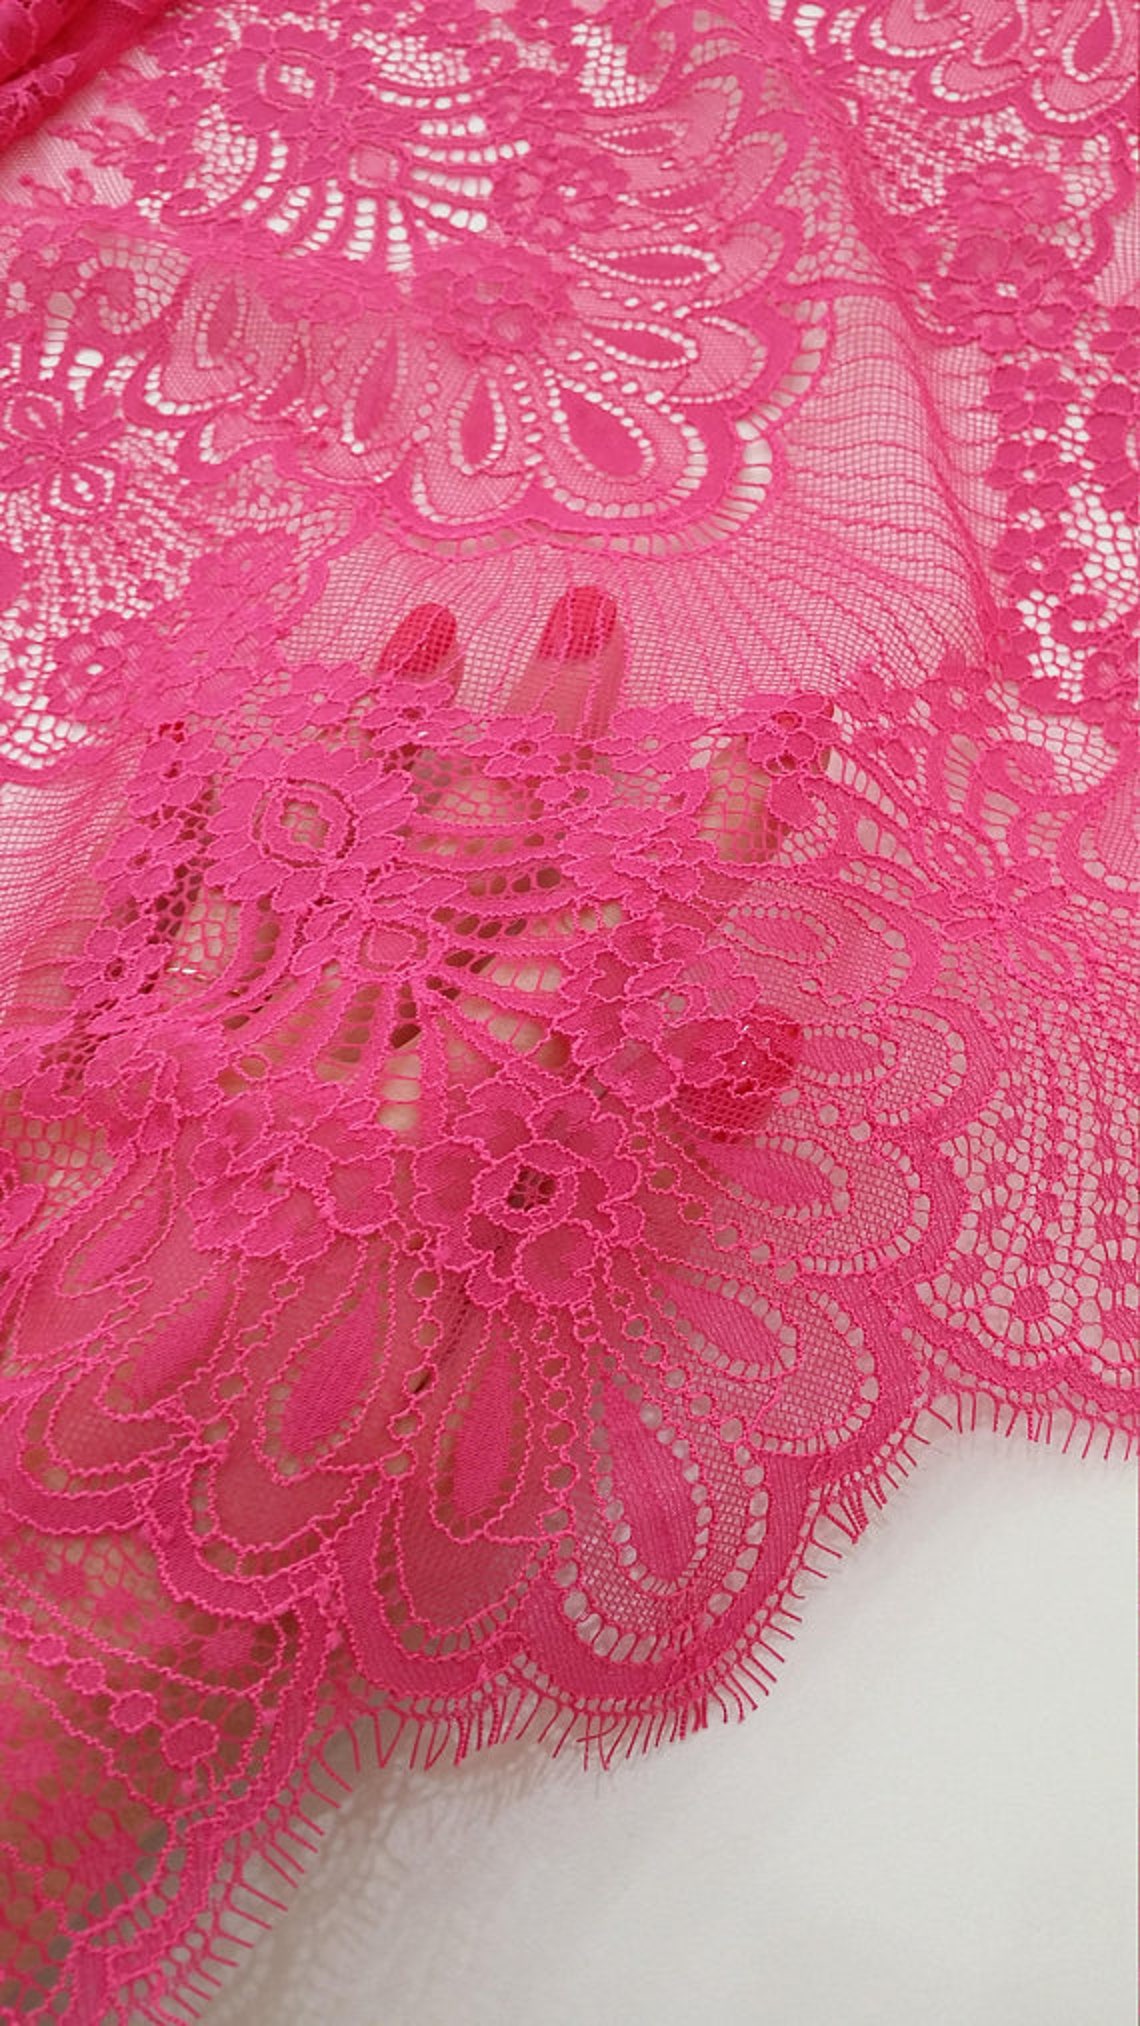 Pink lace fabric French Lace Chantilly Lace Bridal lace | Etsy